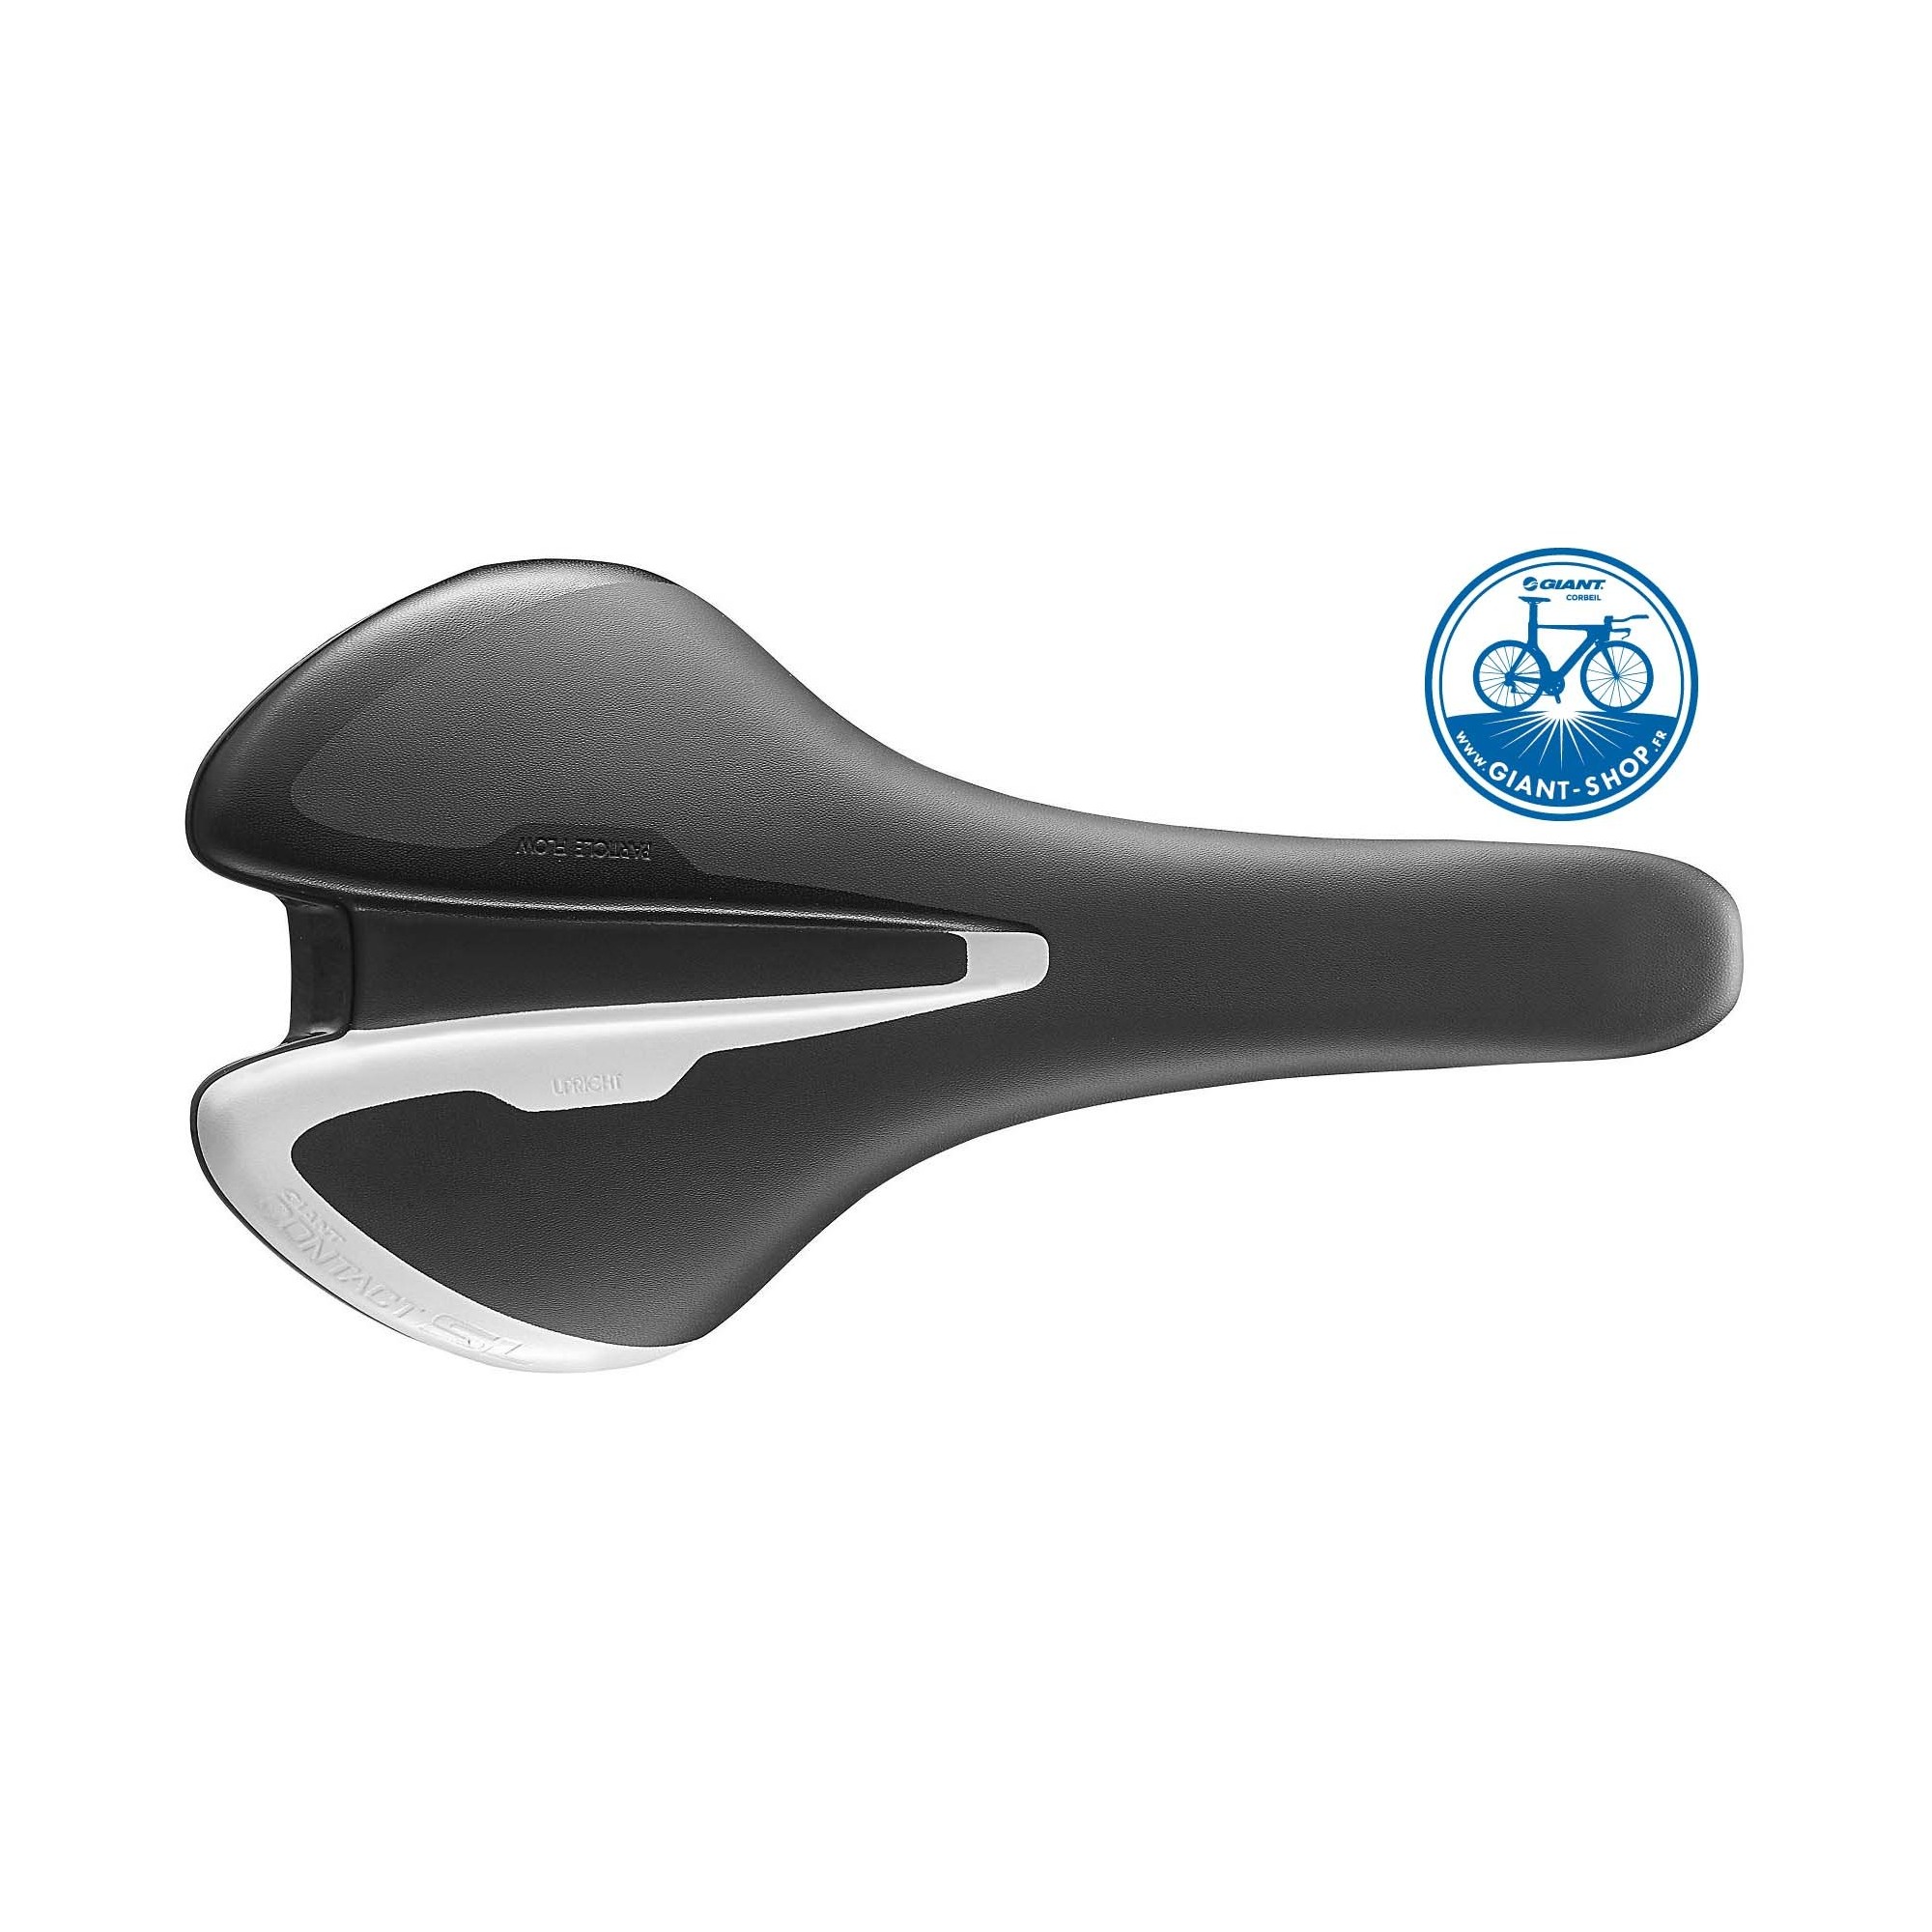 Selle Giant Contact SL Upright Noire